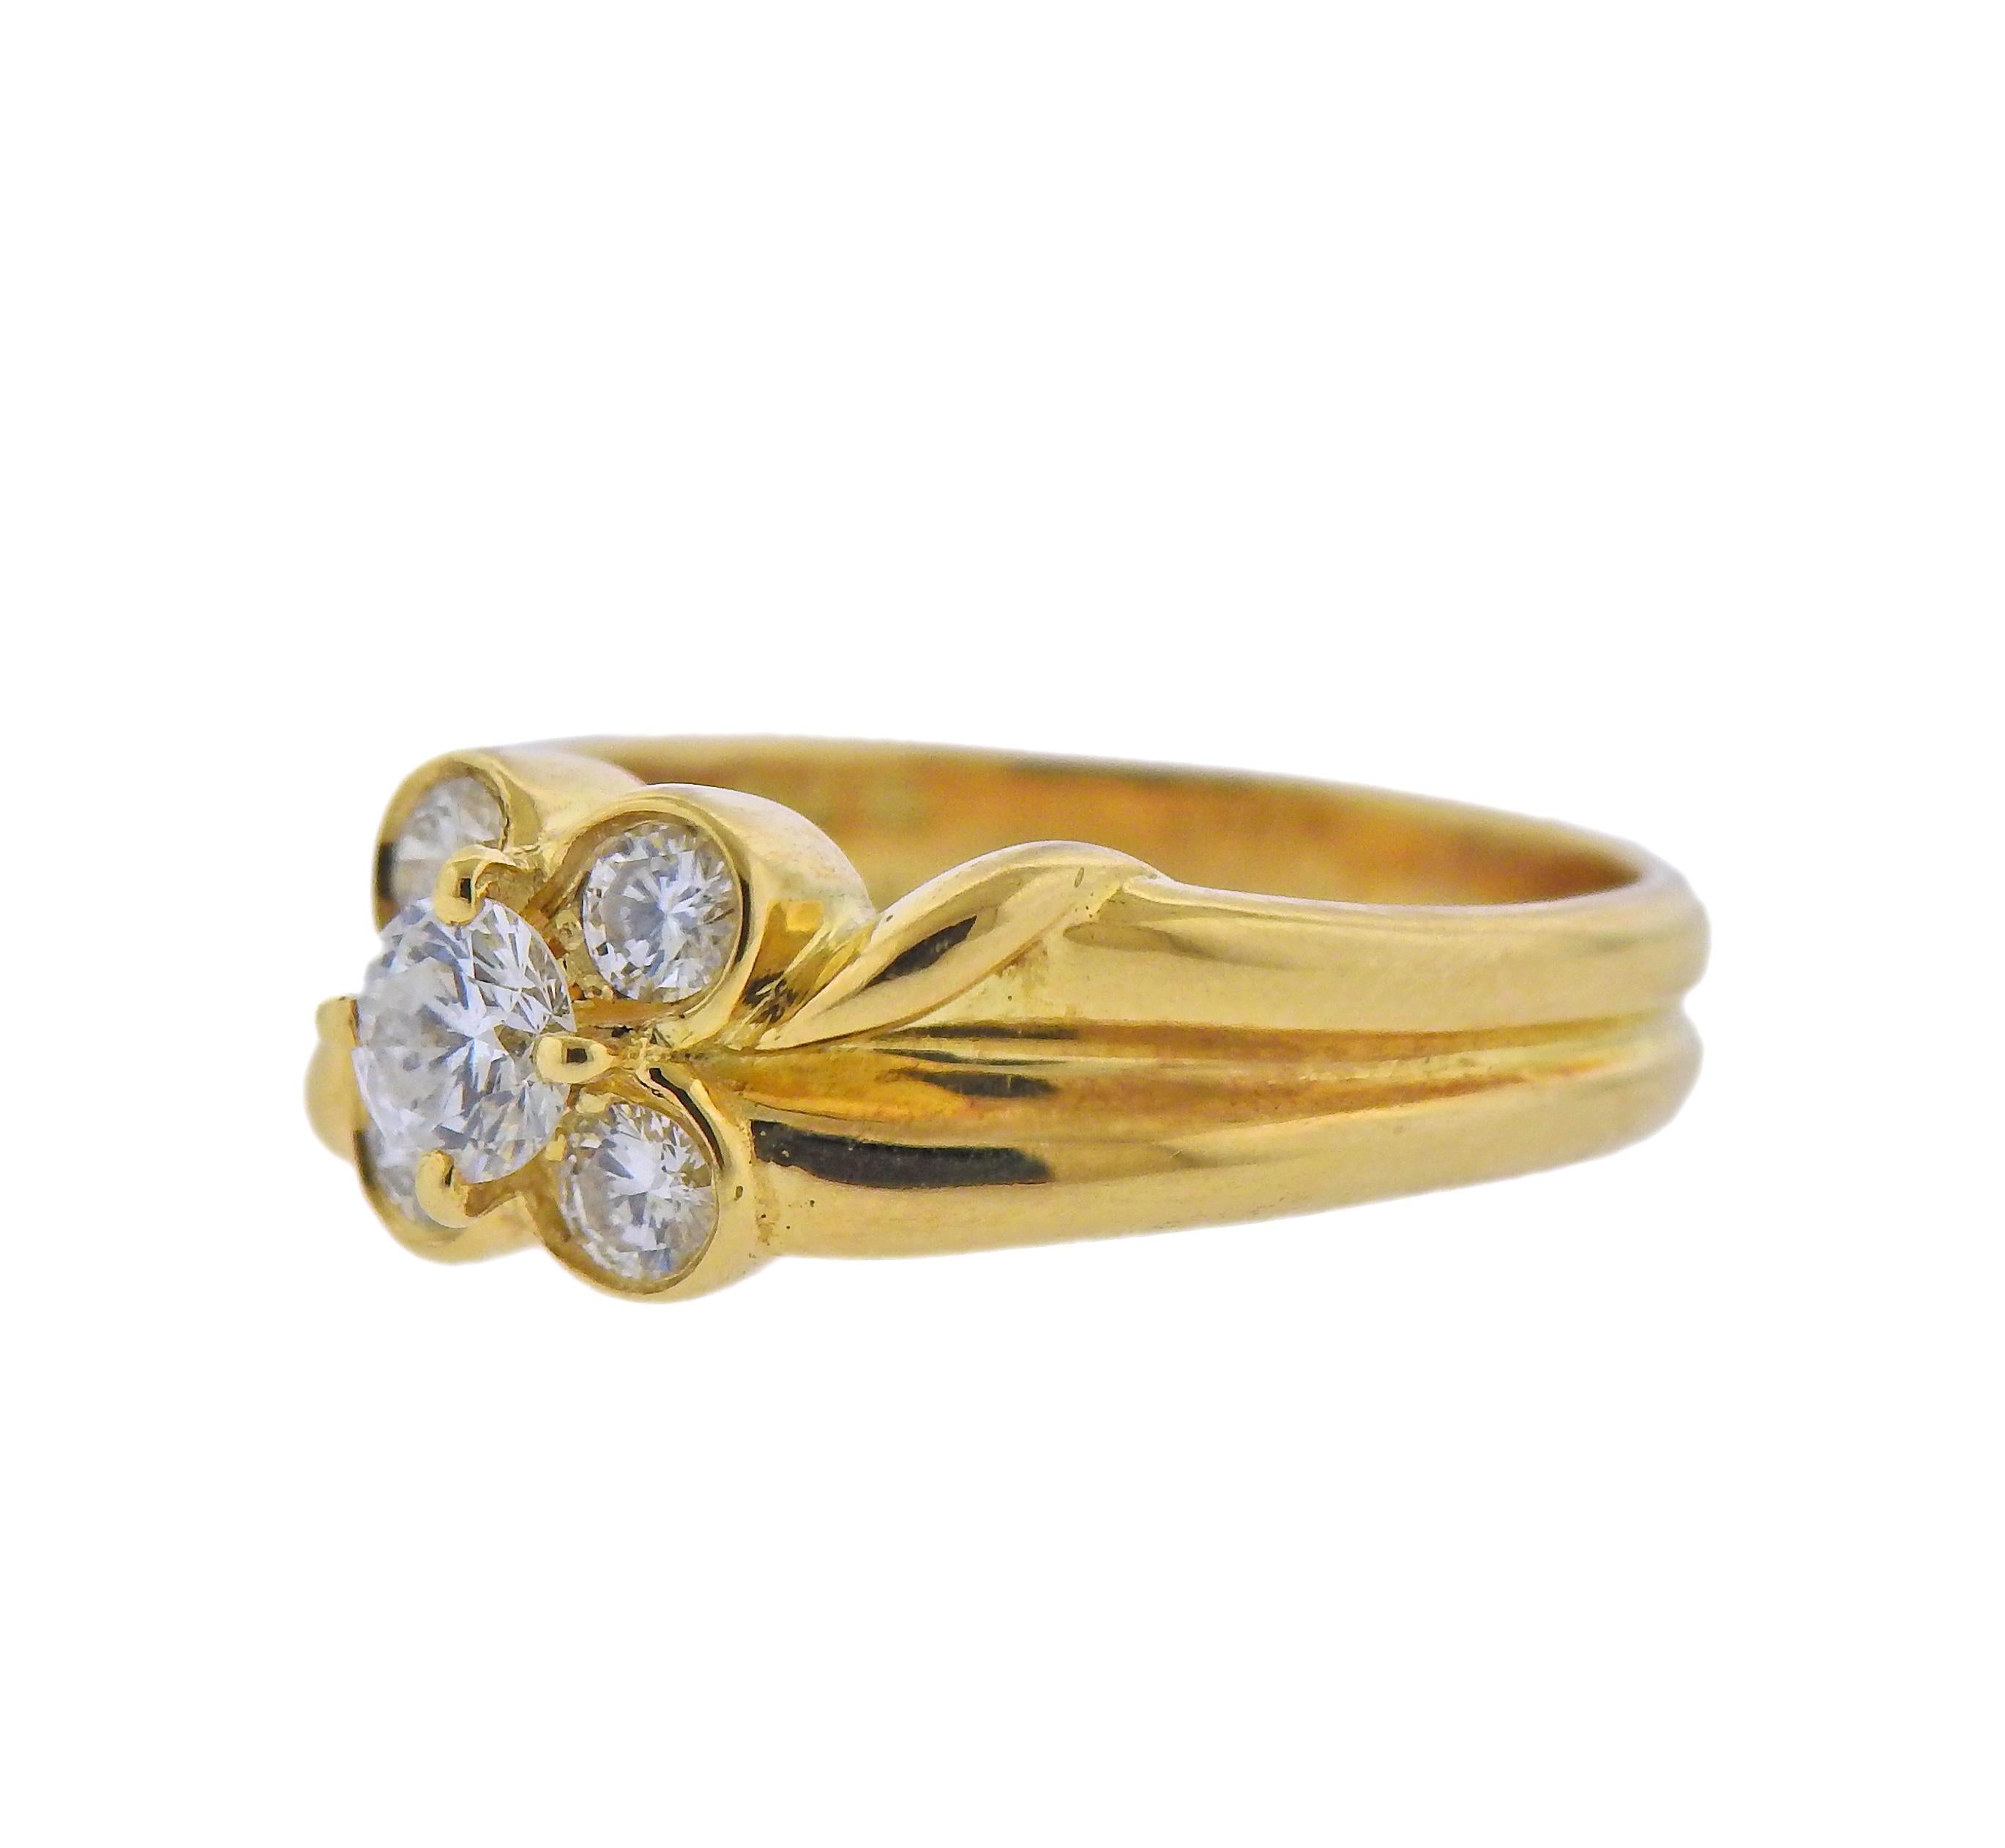 18k yellow gold flower ring by Van Cleef & Arpels with approx. 0.55ctw in diamonds. Ring size - 4.5, ring top - 7.3mm wide. Marked: VCA, 18kts, E 5907, A213. Weight - 4.7 grams.